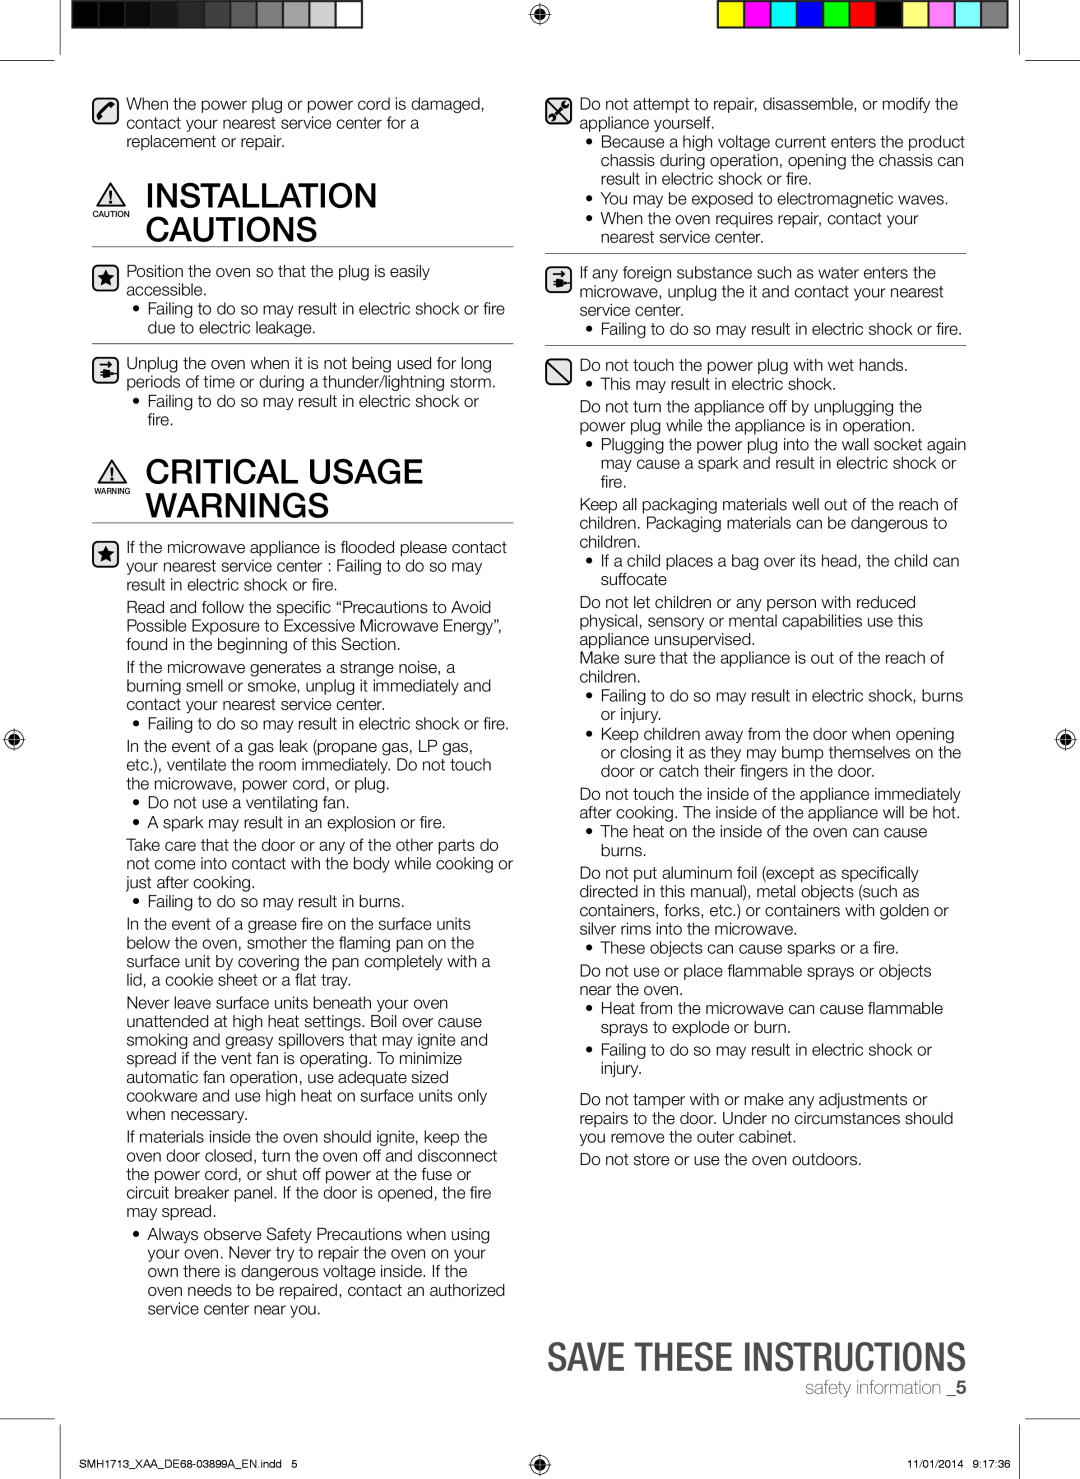 Samsung SMH1713 user manual Installation, Save these instructions, safety information, Caution Cautions 